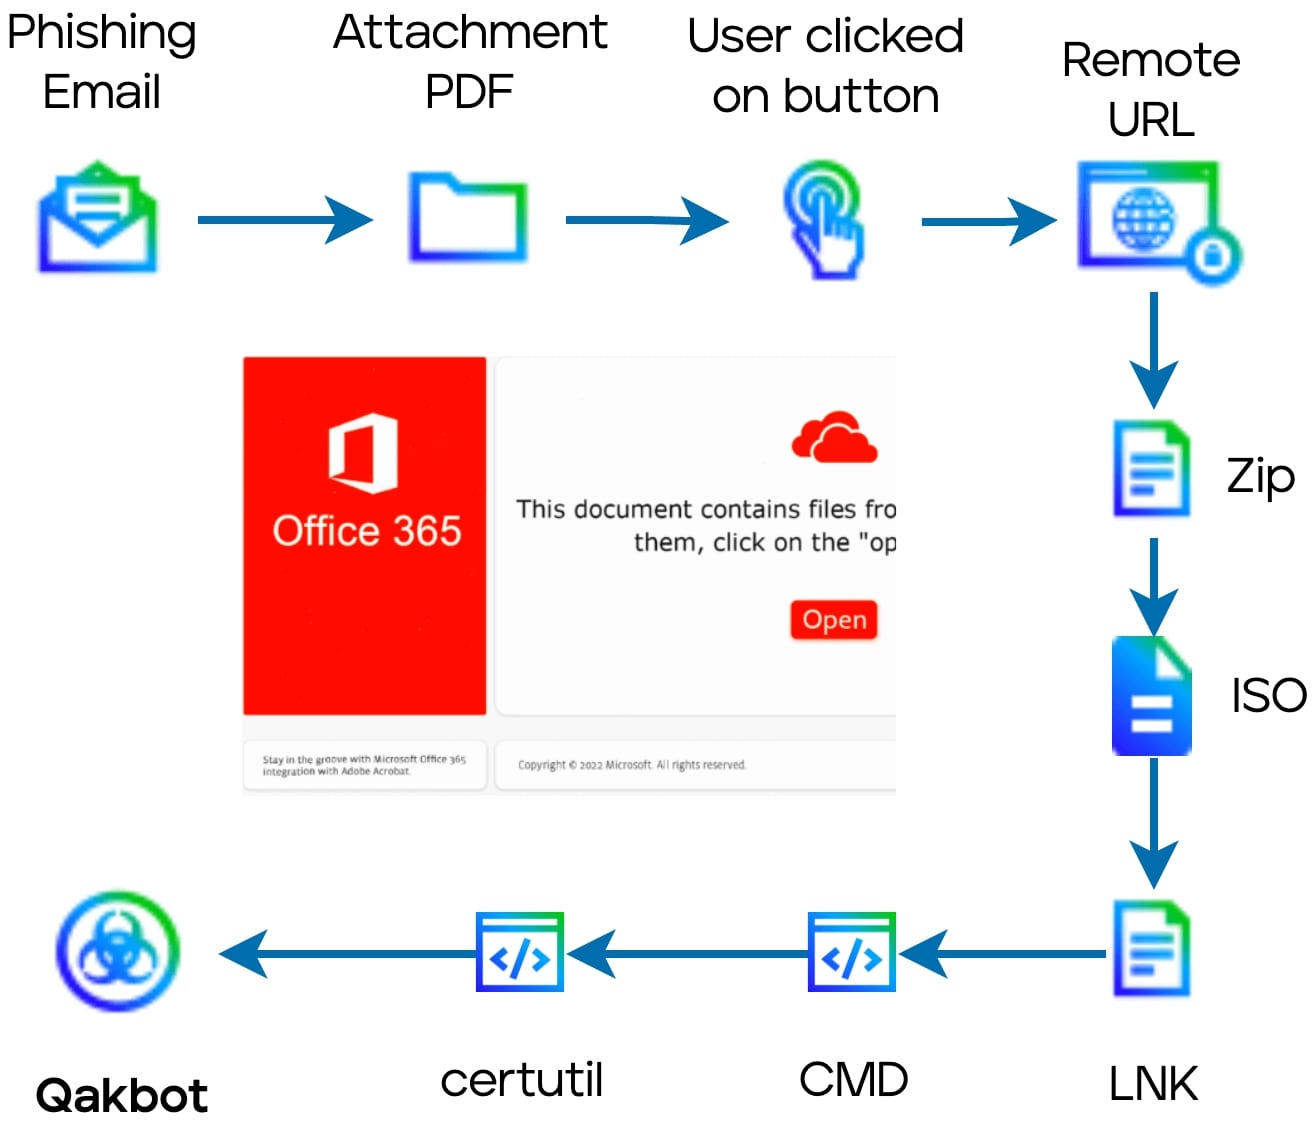 Figure 19 Attack vector of Office365 themed phishing in PDF
attachment.